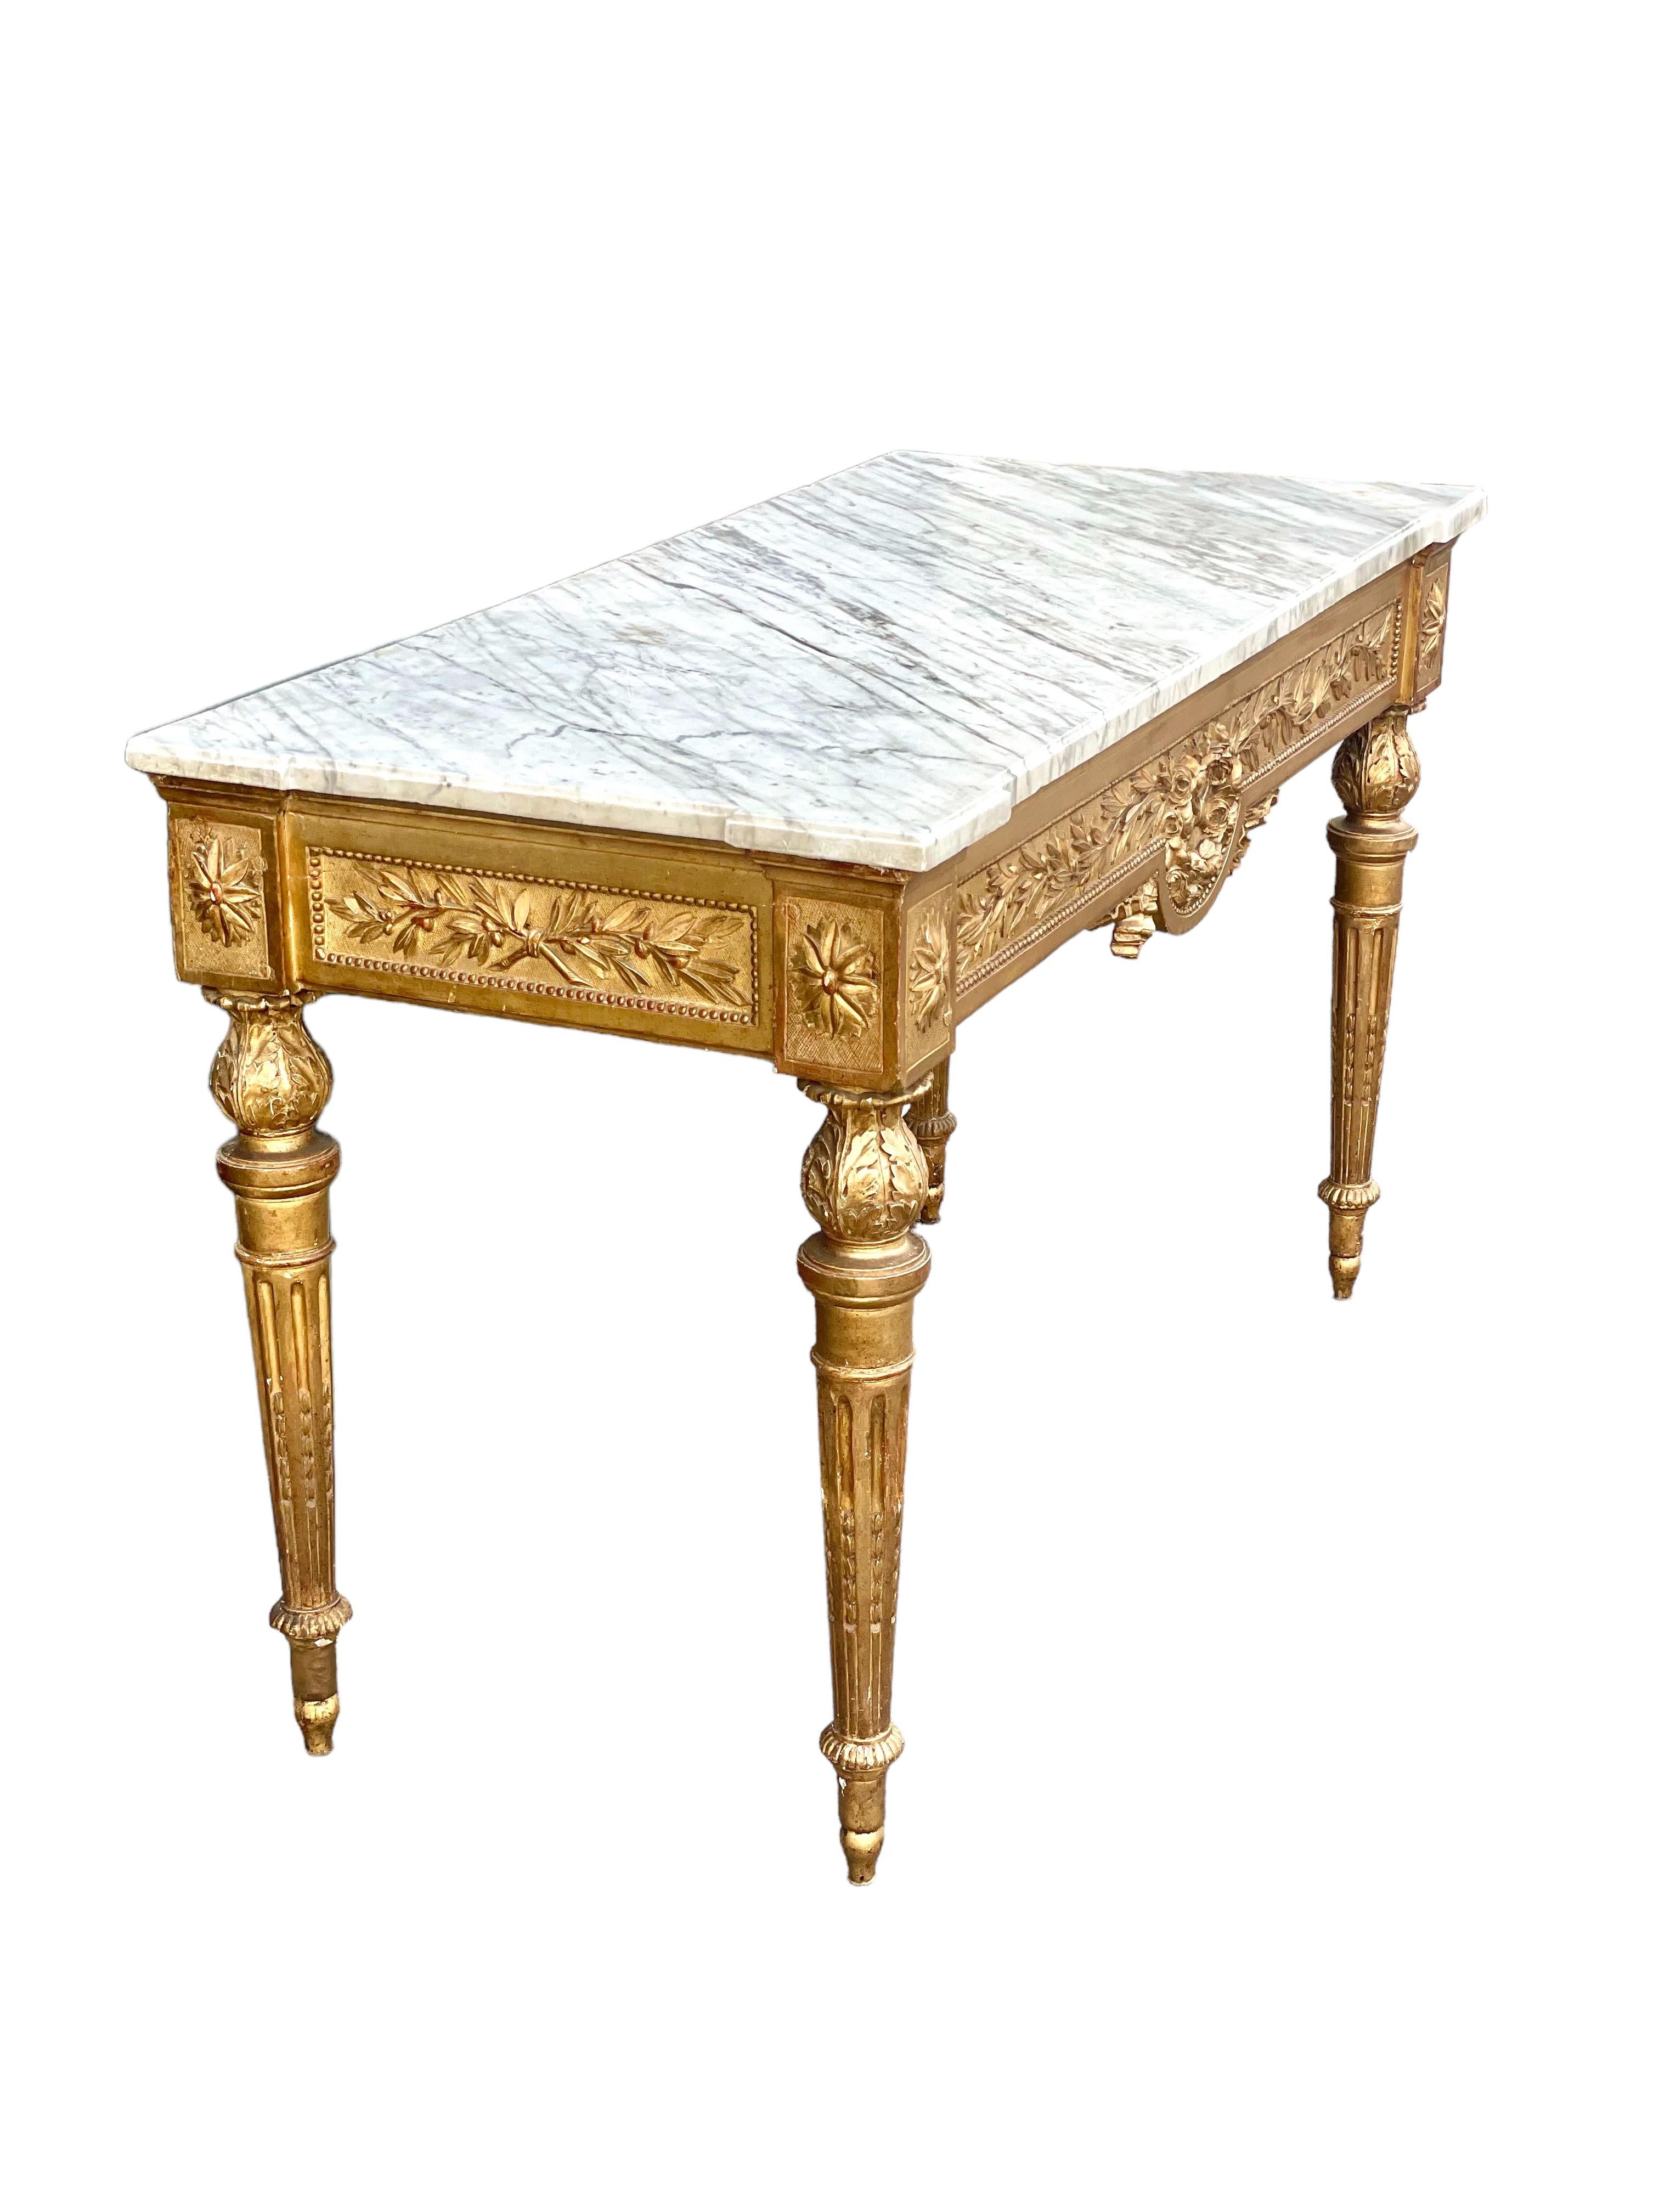 18th Century French Louis XVI Period Giltwood Console Table For Sale 4